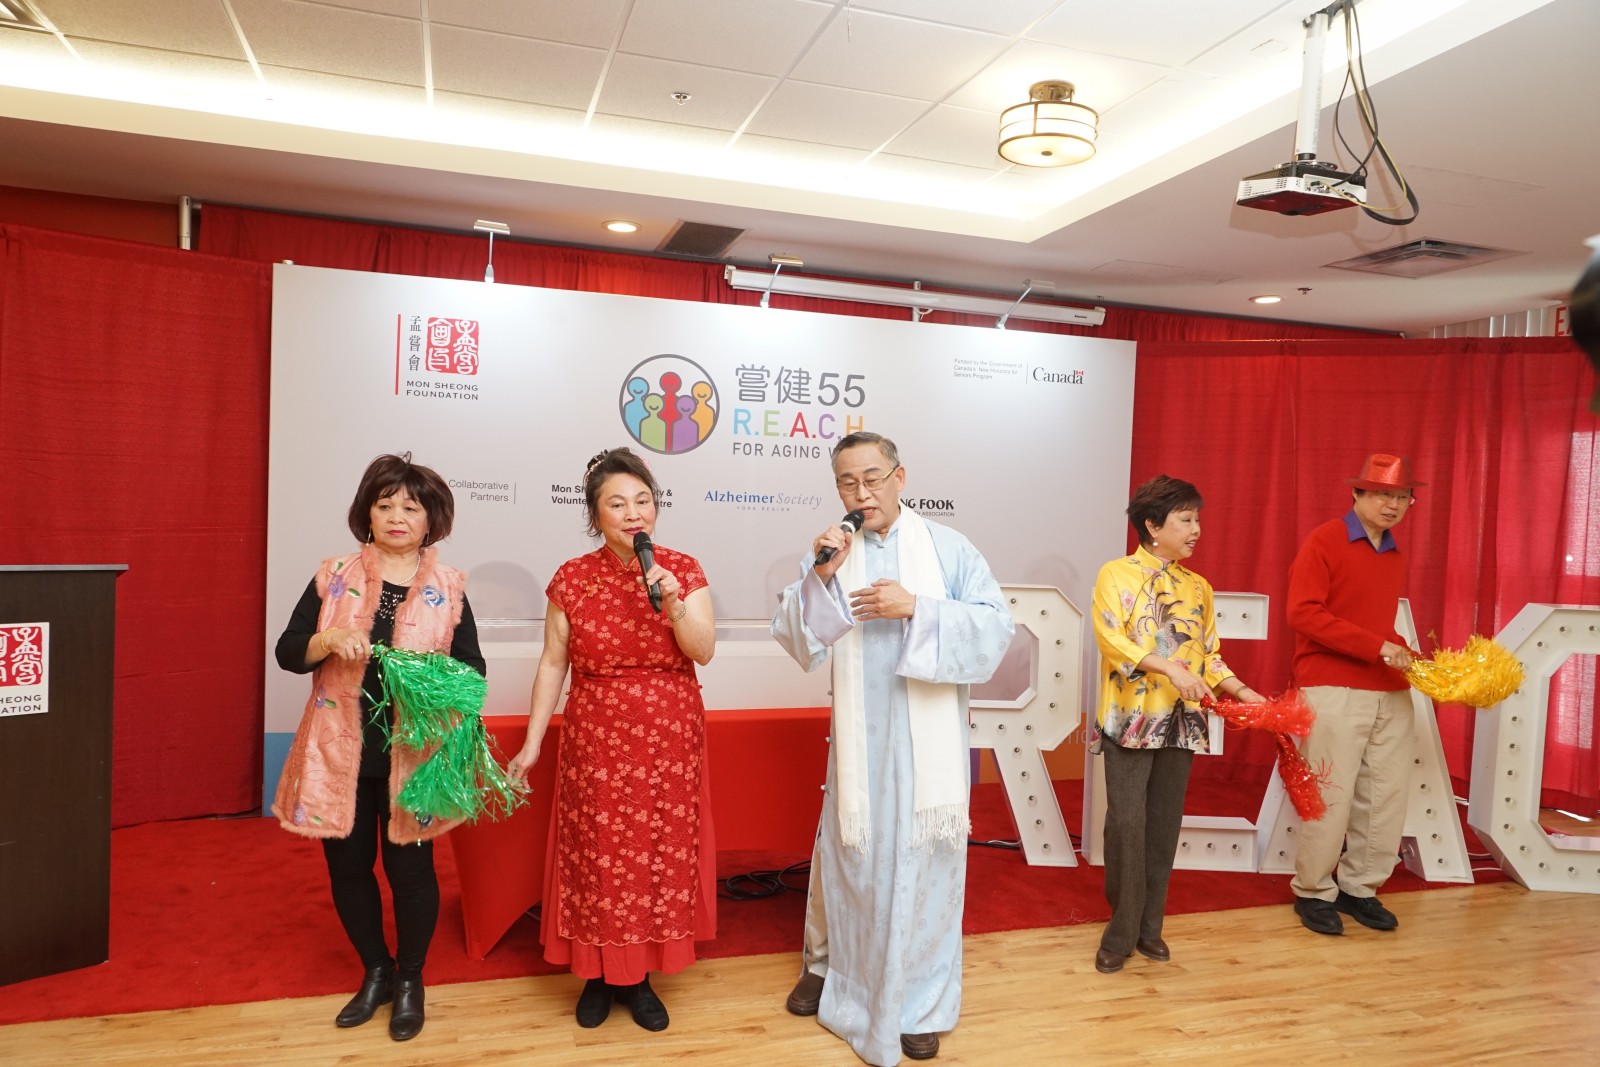 Performers coming from Mon Sheong Community & Volunteer Services Centre